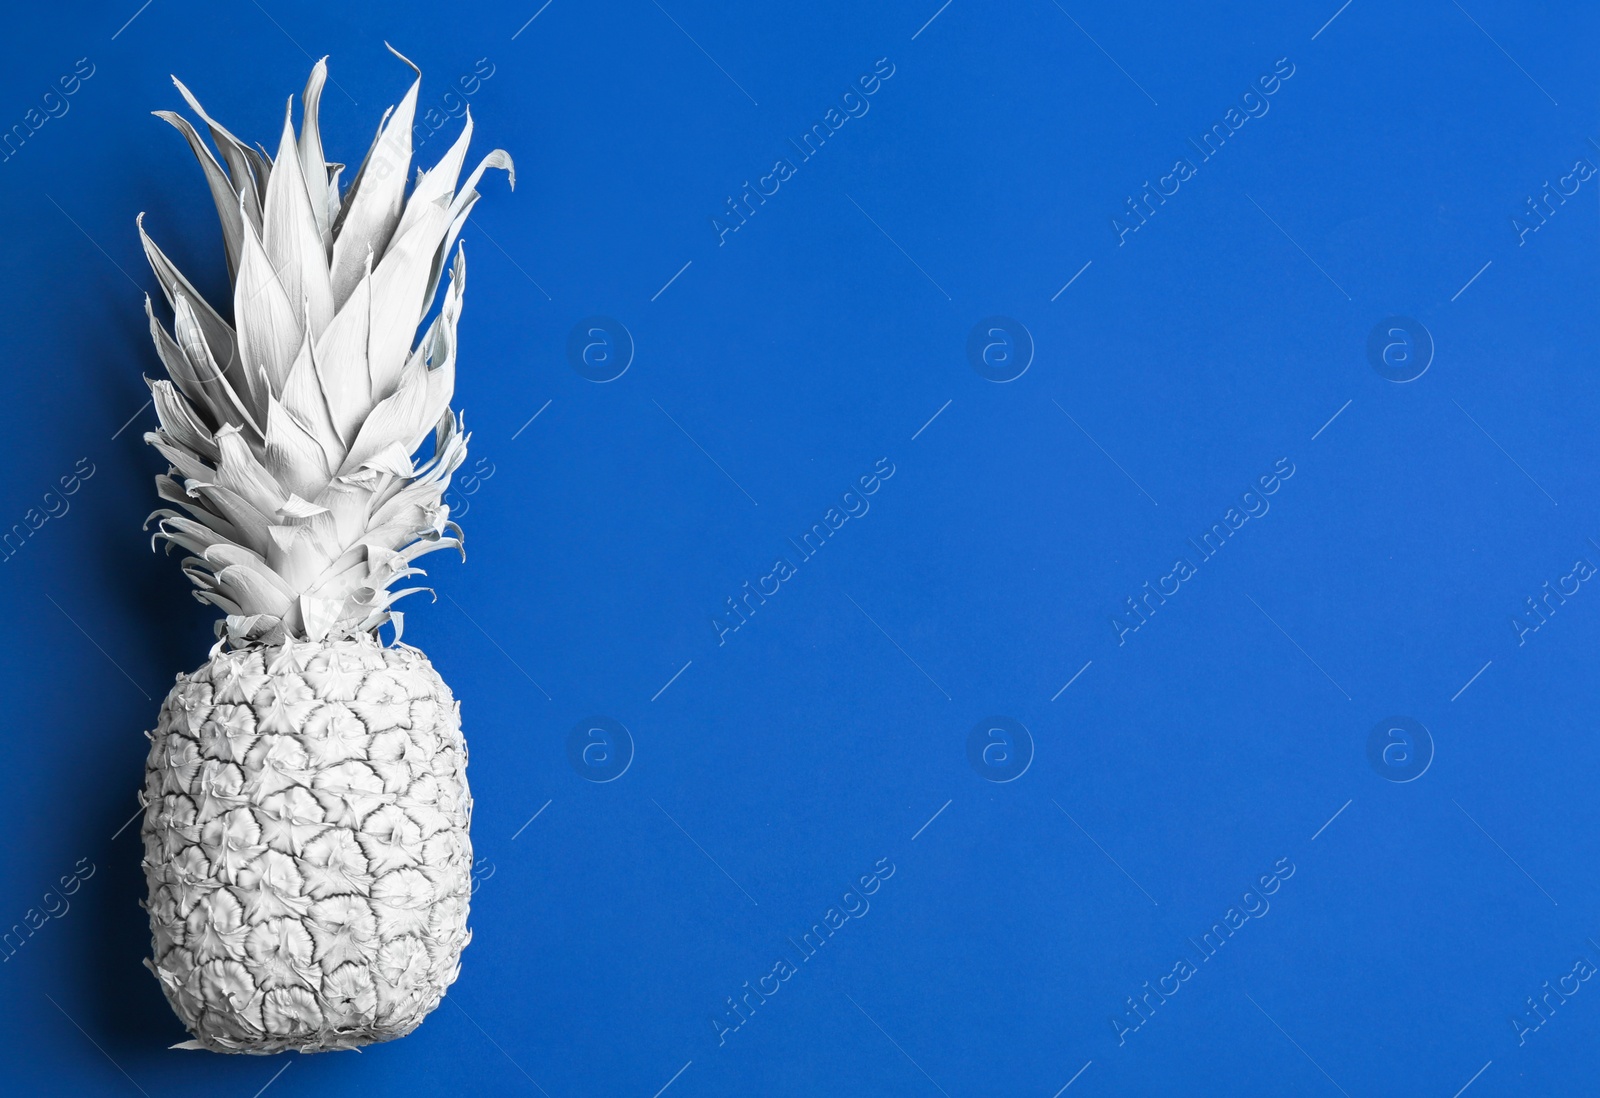 Photo of White pineapple on blue background, top view with space for text. Creative concept